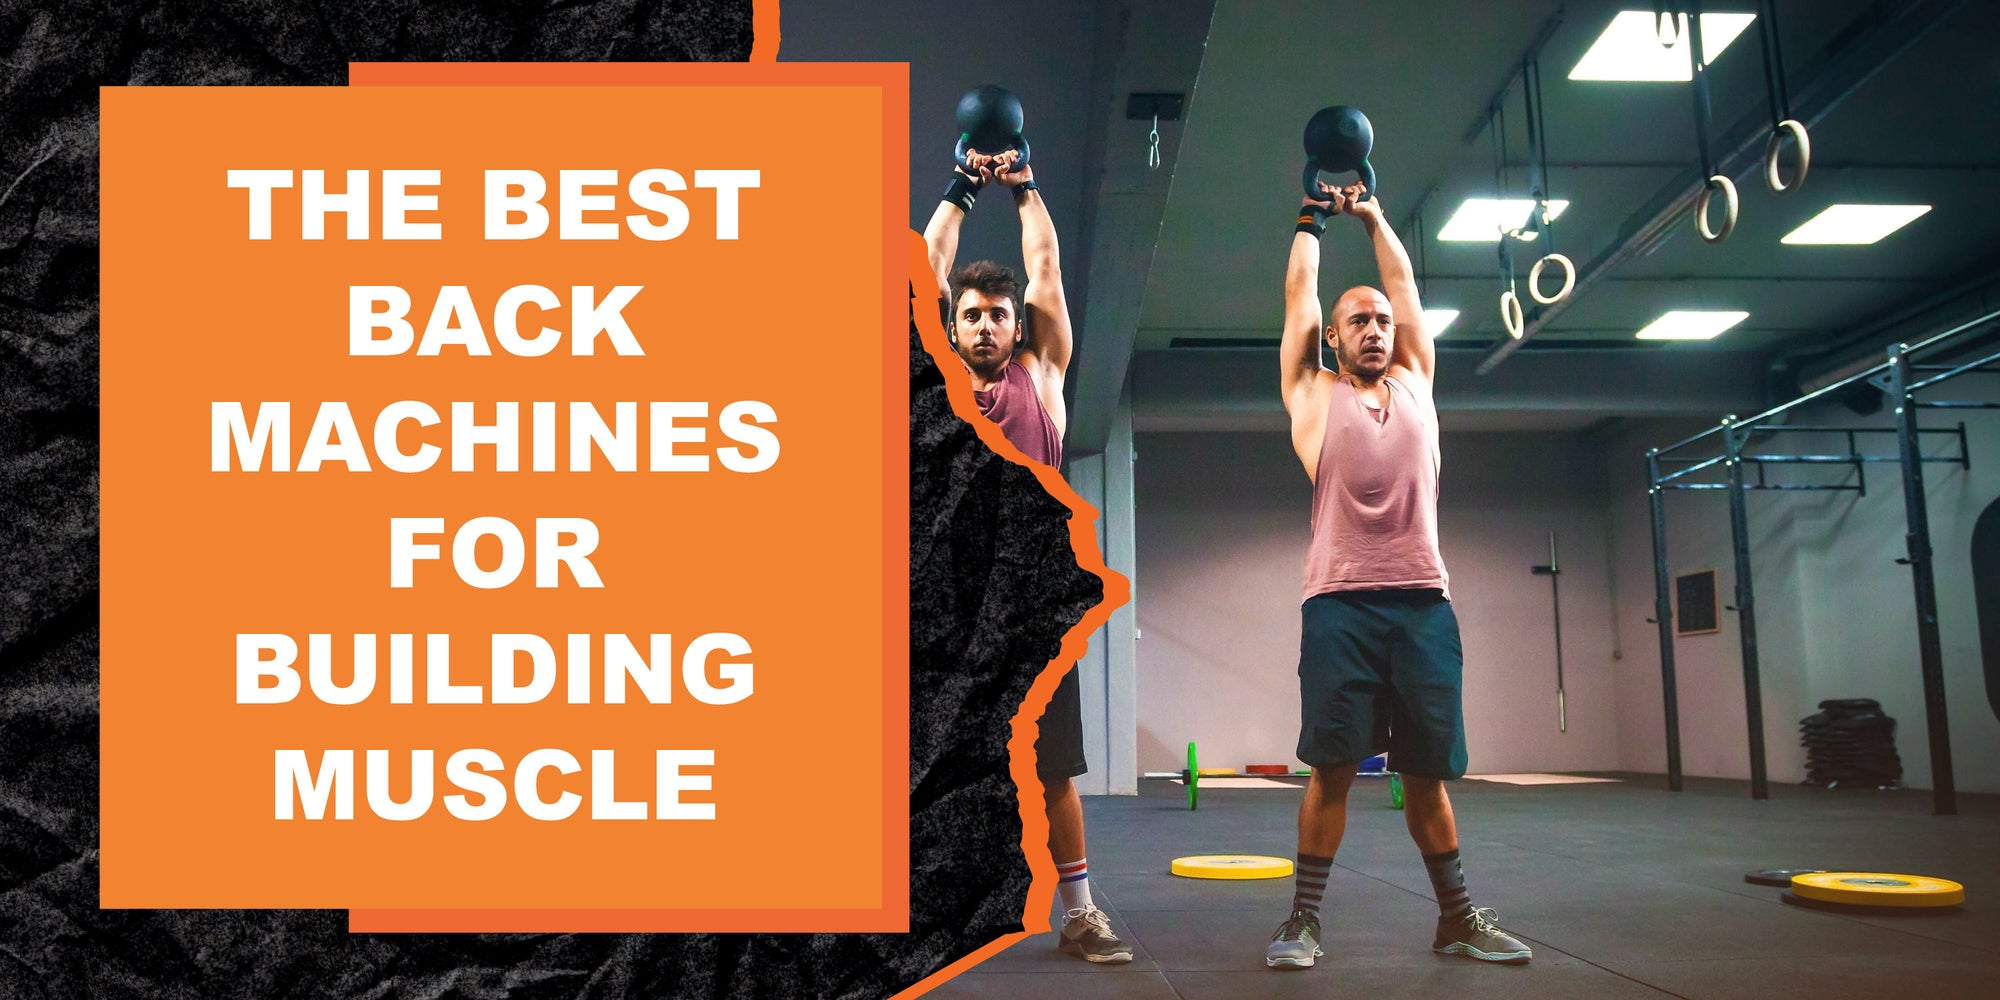 The Best Back Machines for Building Muscle